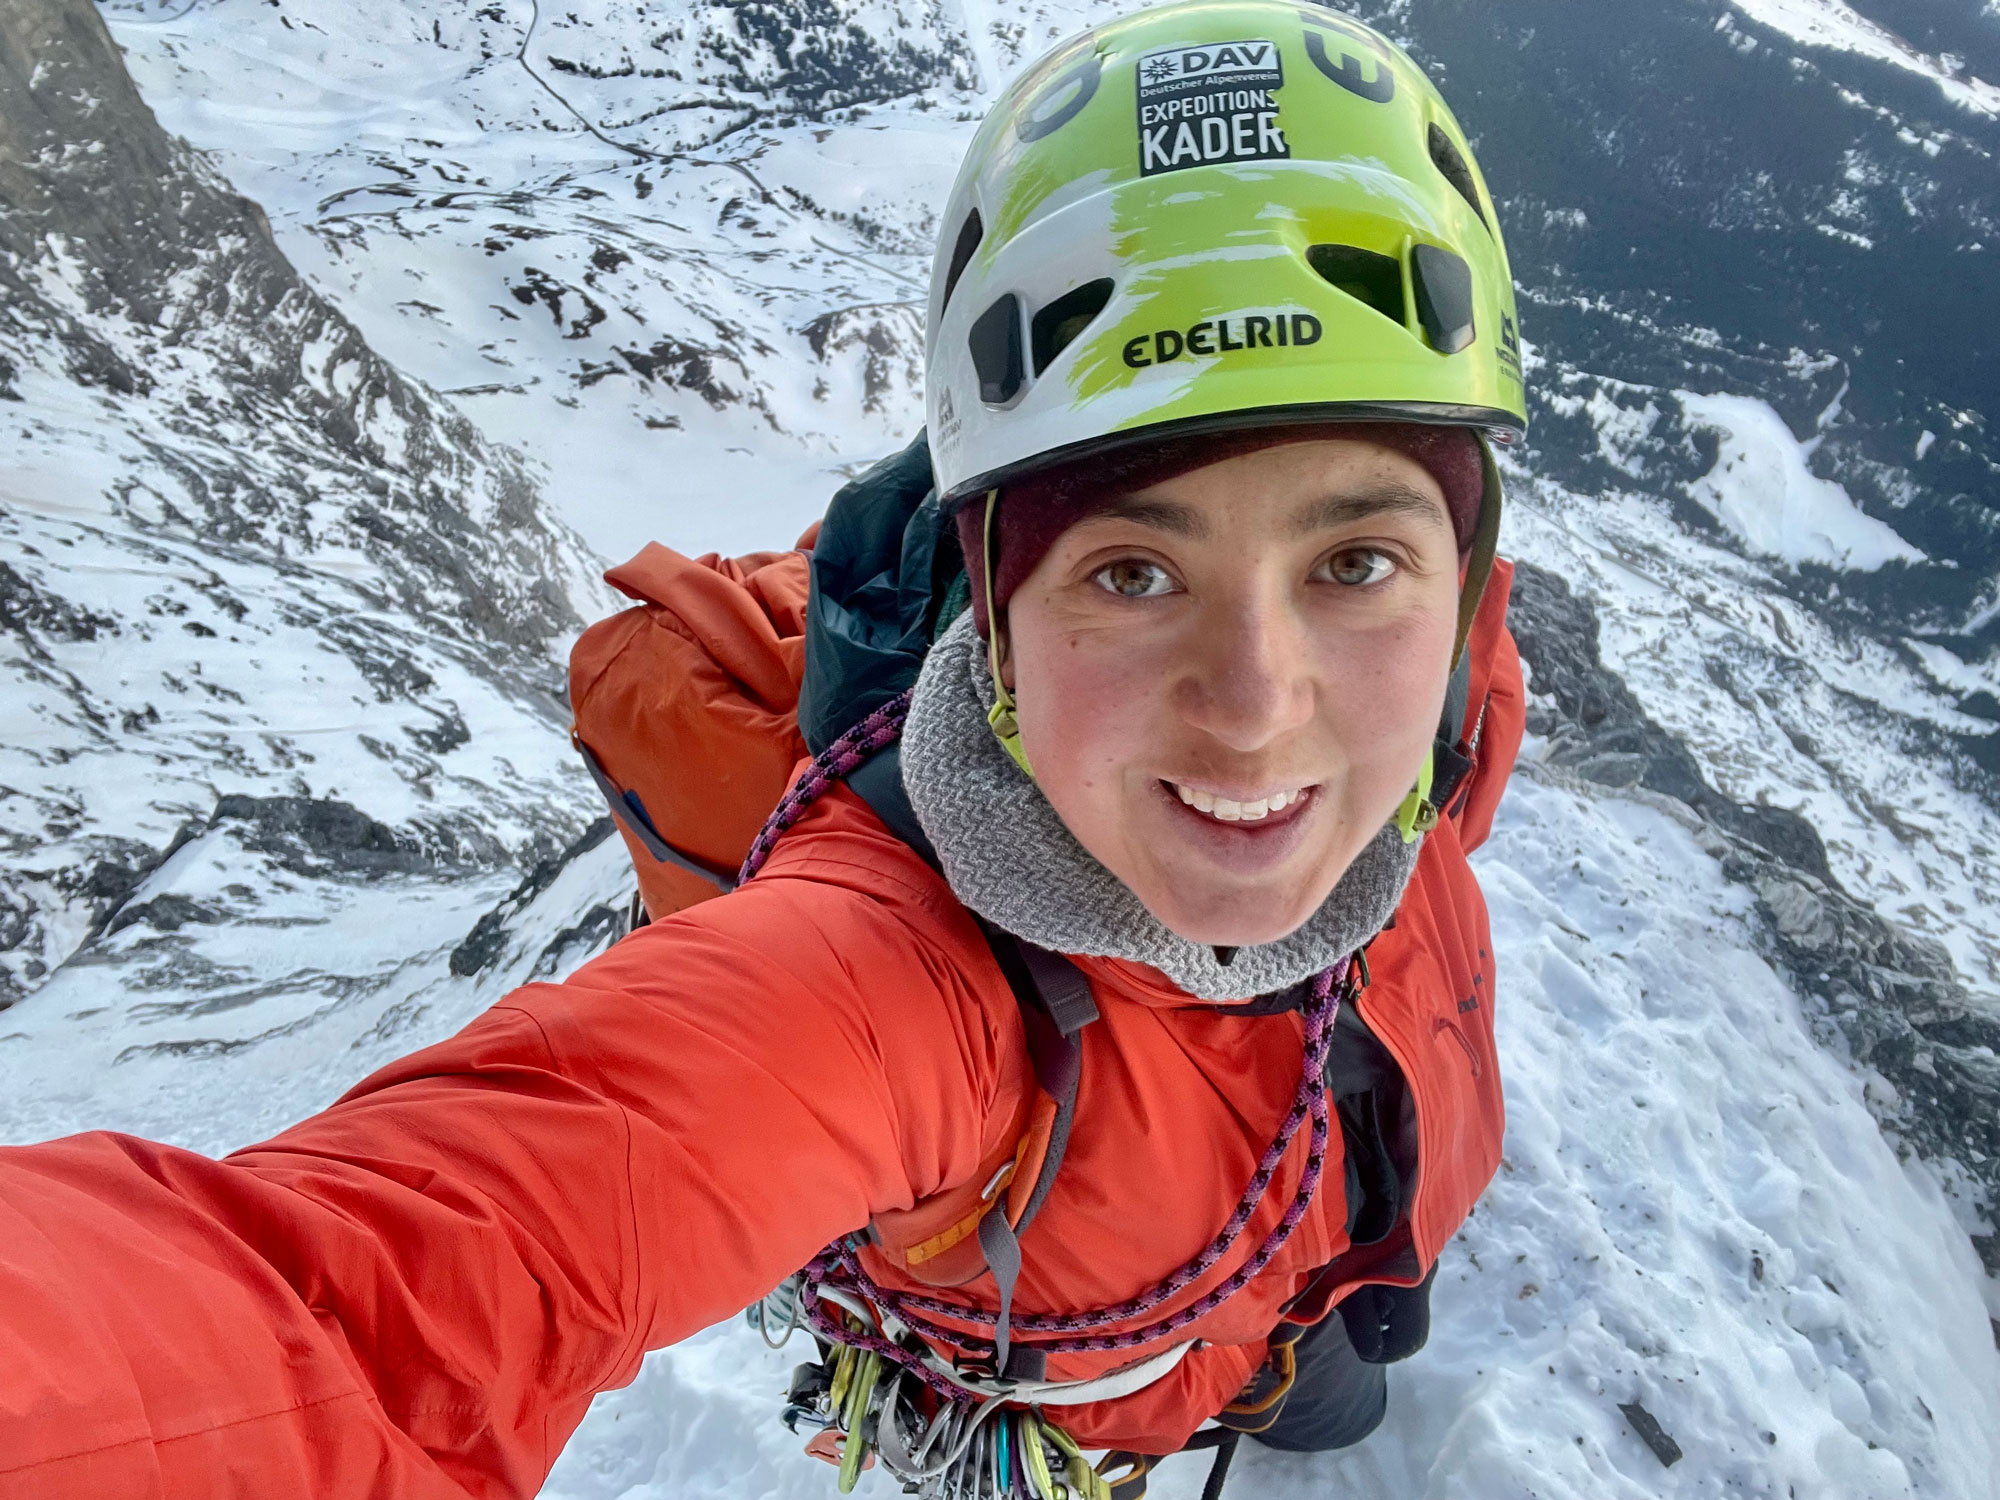 Laura Tiefenthaler smiles during her solo ascent of the Eiger North Face on March 25.